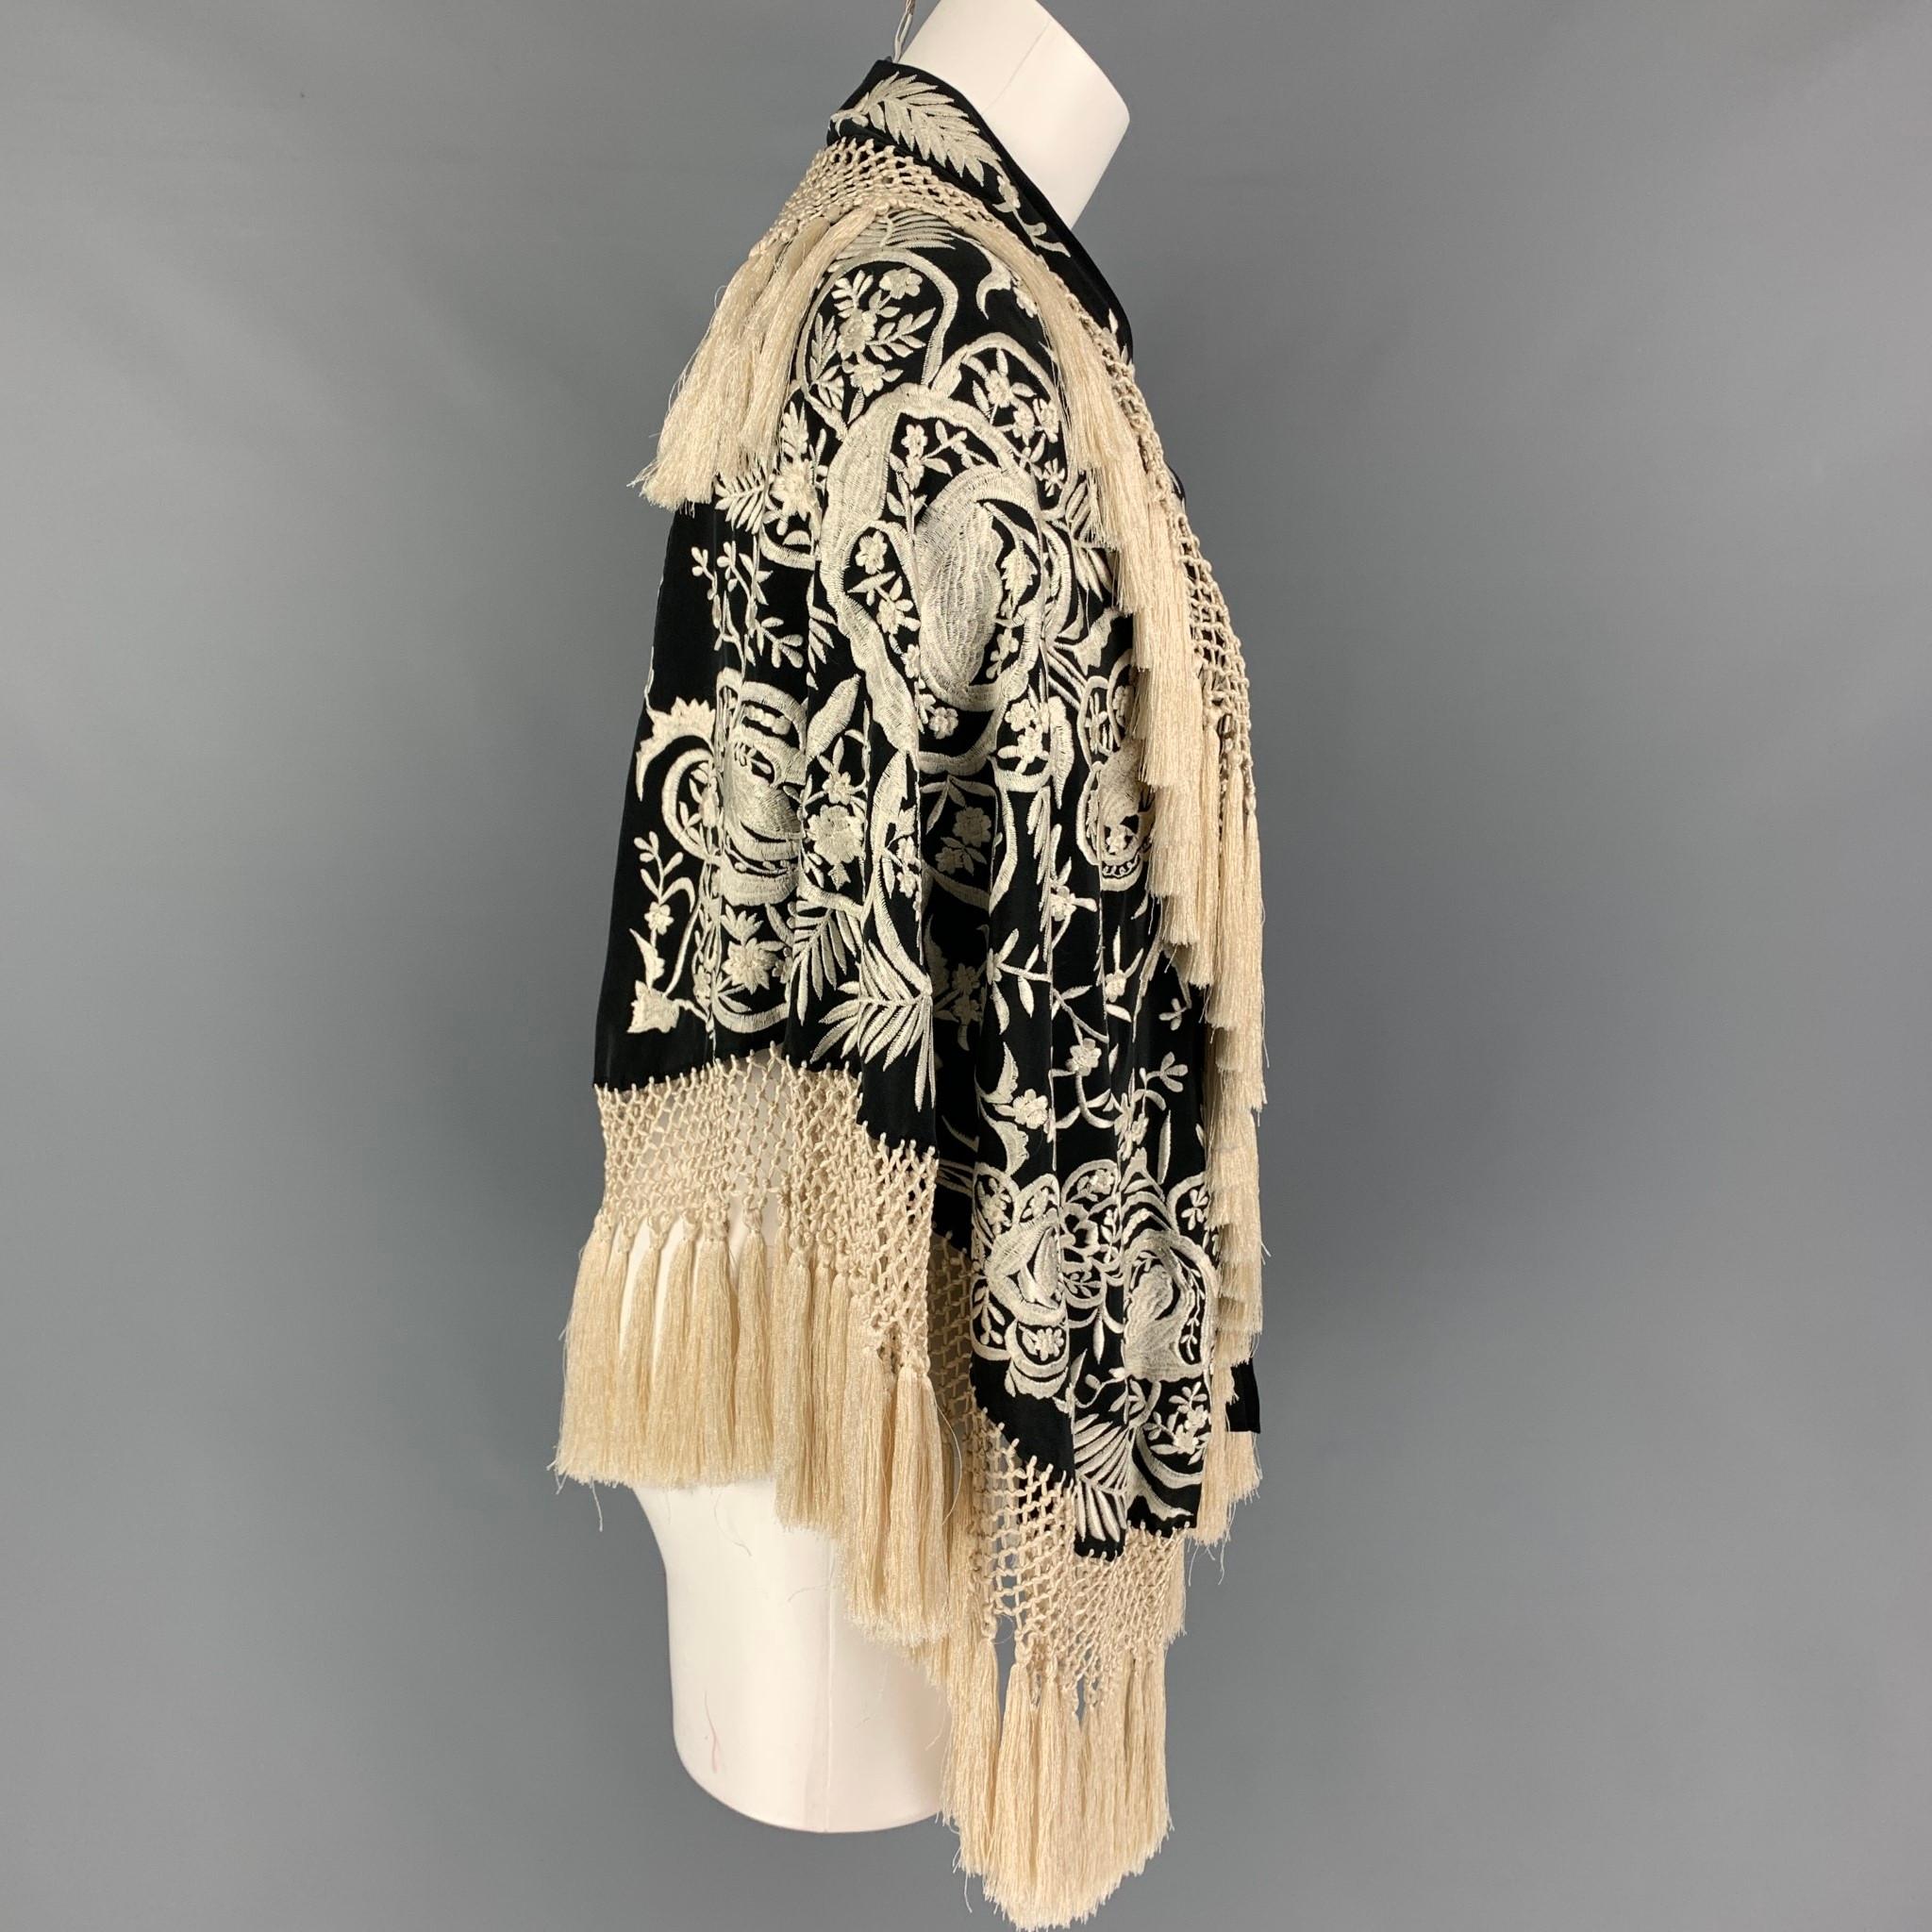 DRIES VAN NOTEN cape comes in a black & cream silk featuring embroidered designs, fringe tassels, and a self-tie closure. 

Very Good Pre-Owned Condition.
Marked: One Size

Measurements

Length: 26 in. 